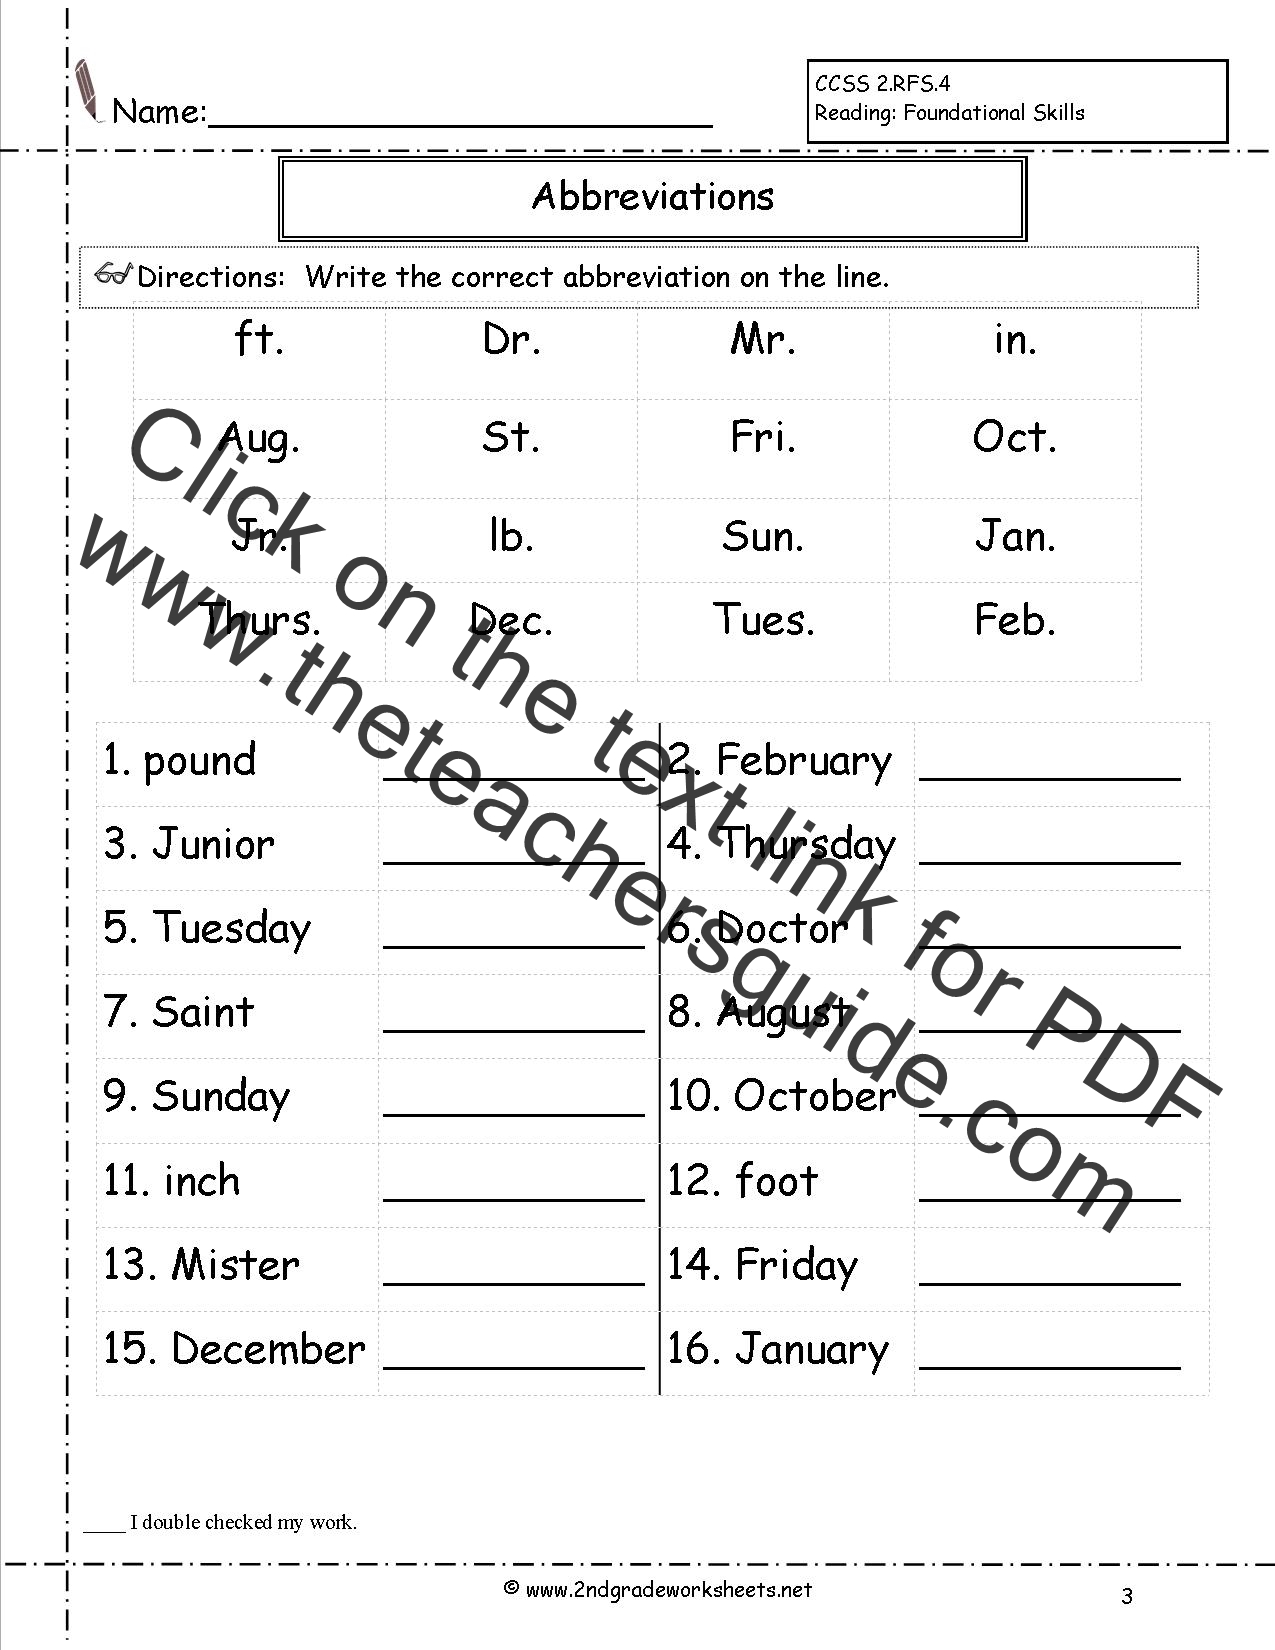 abbreviation and acronym worksheets